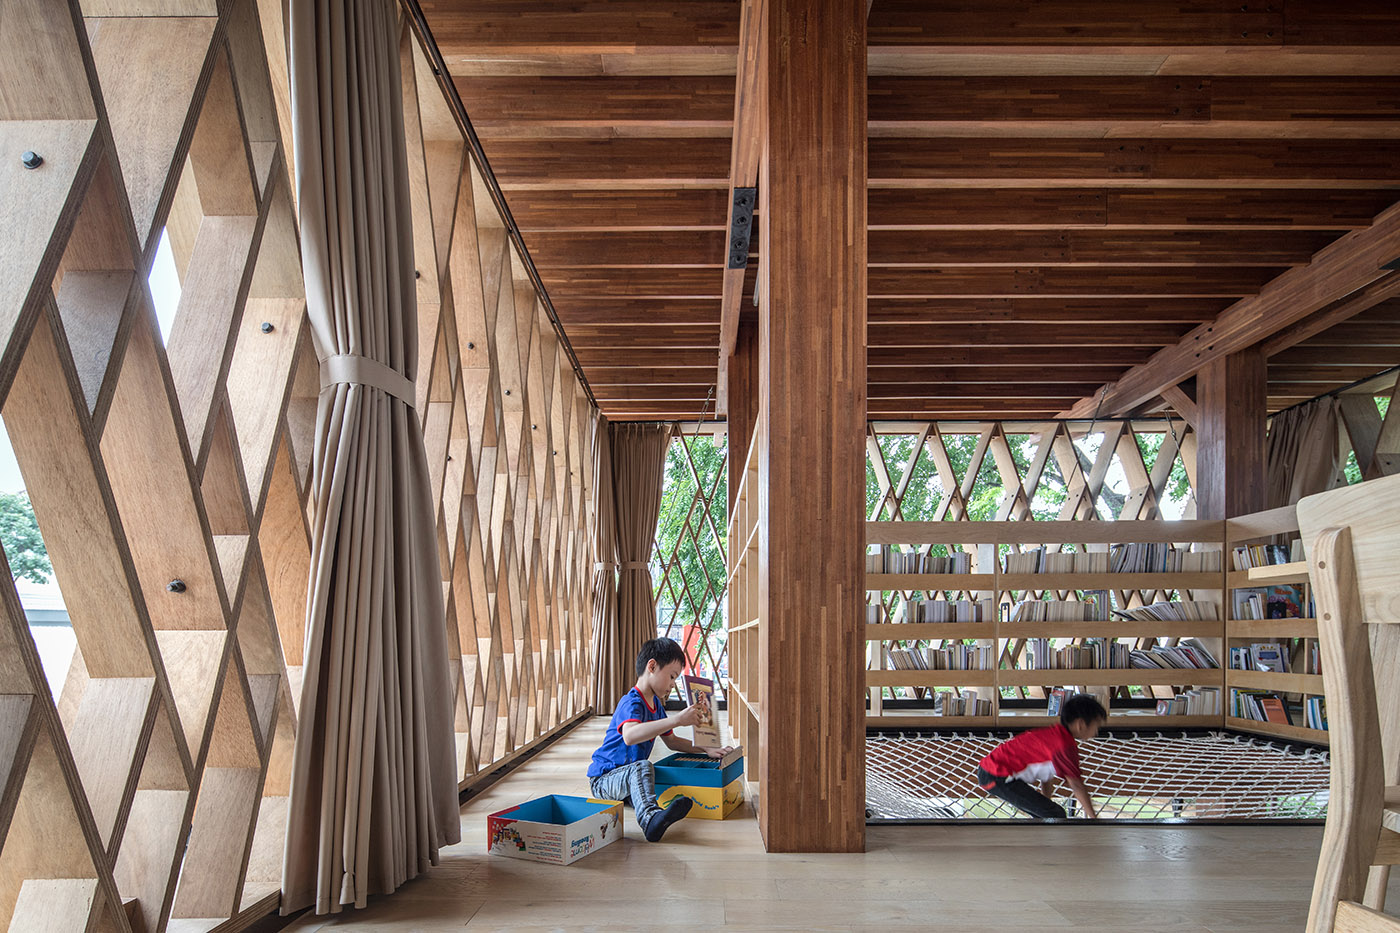 Increasing interest in reading? Microlibrary, multifunctional and sustainable community spaces